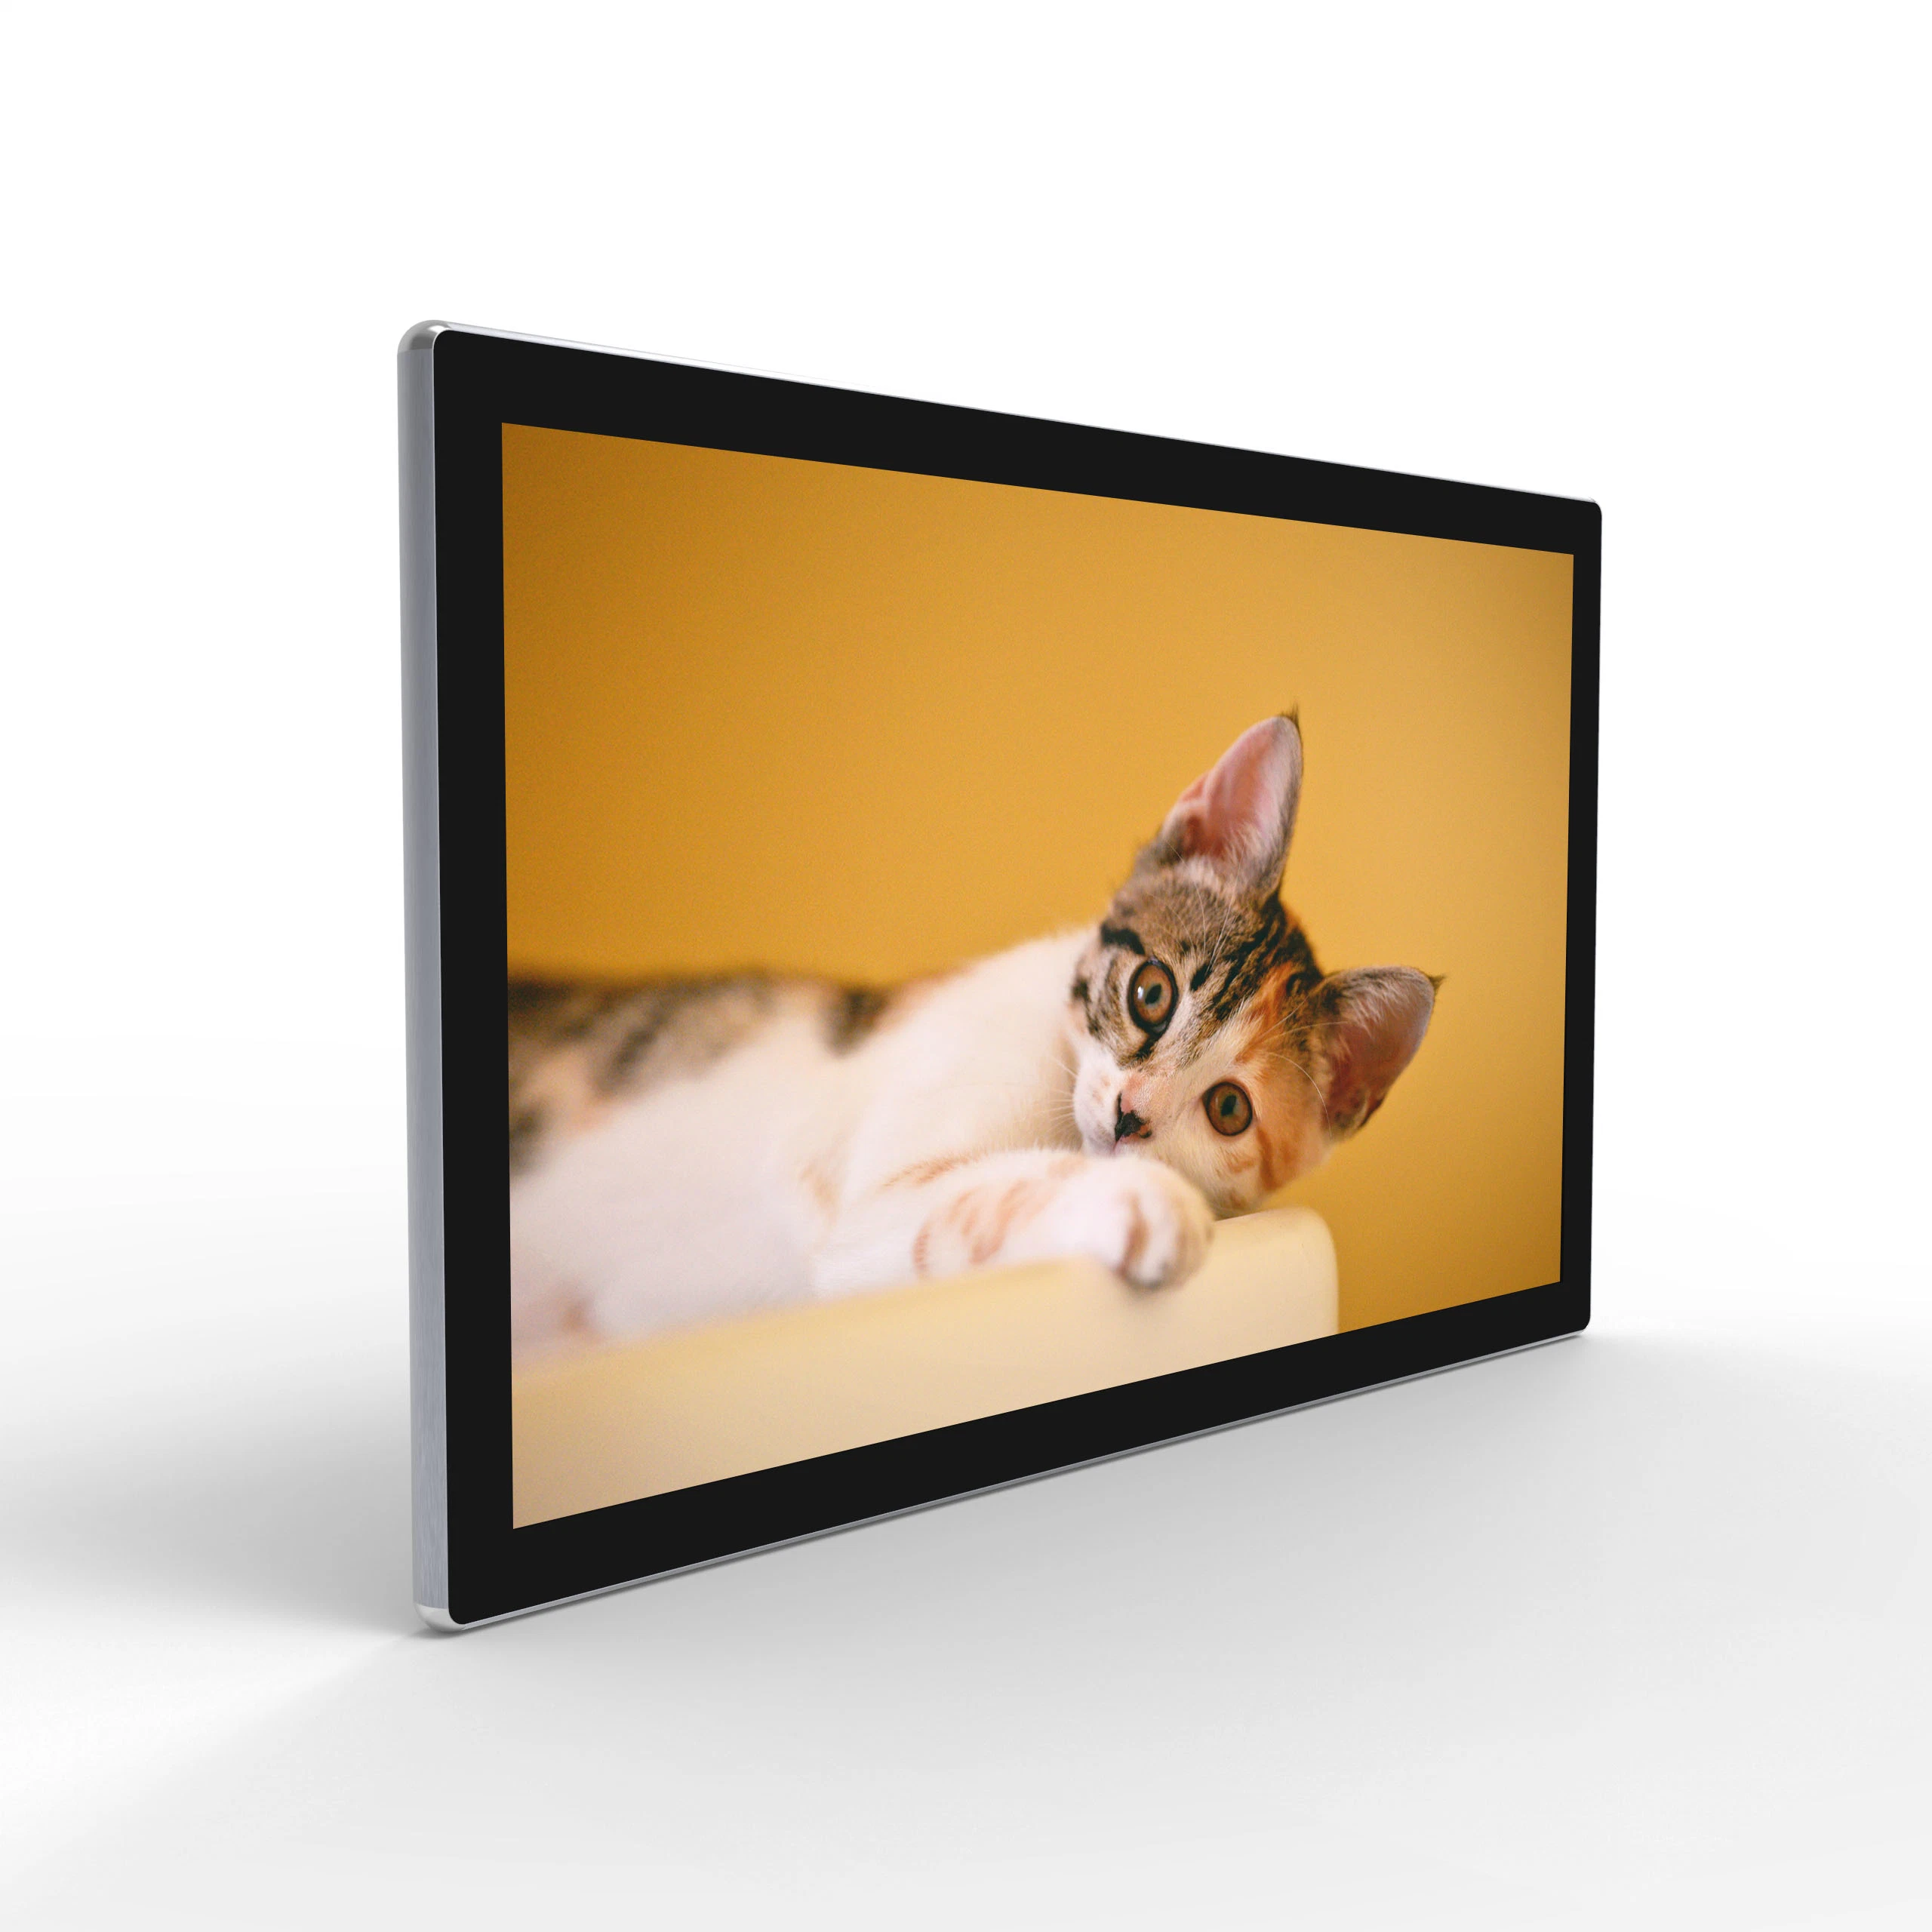 32inch LCD Screen Wall Mounted Advertising Player with Aluminum Profile Frame